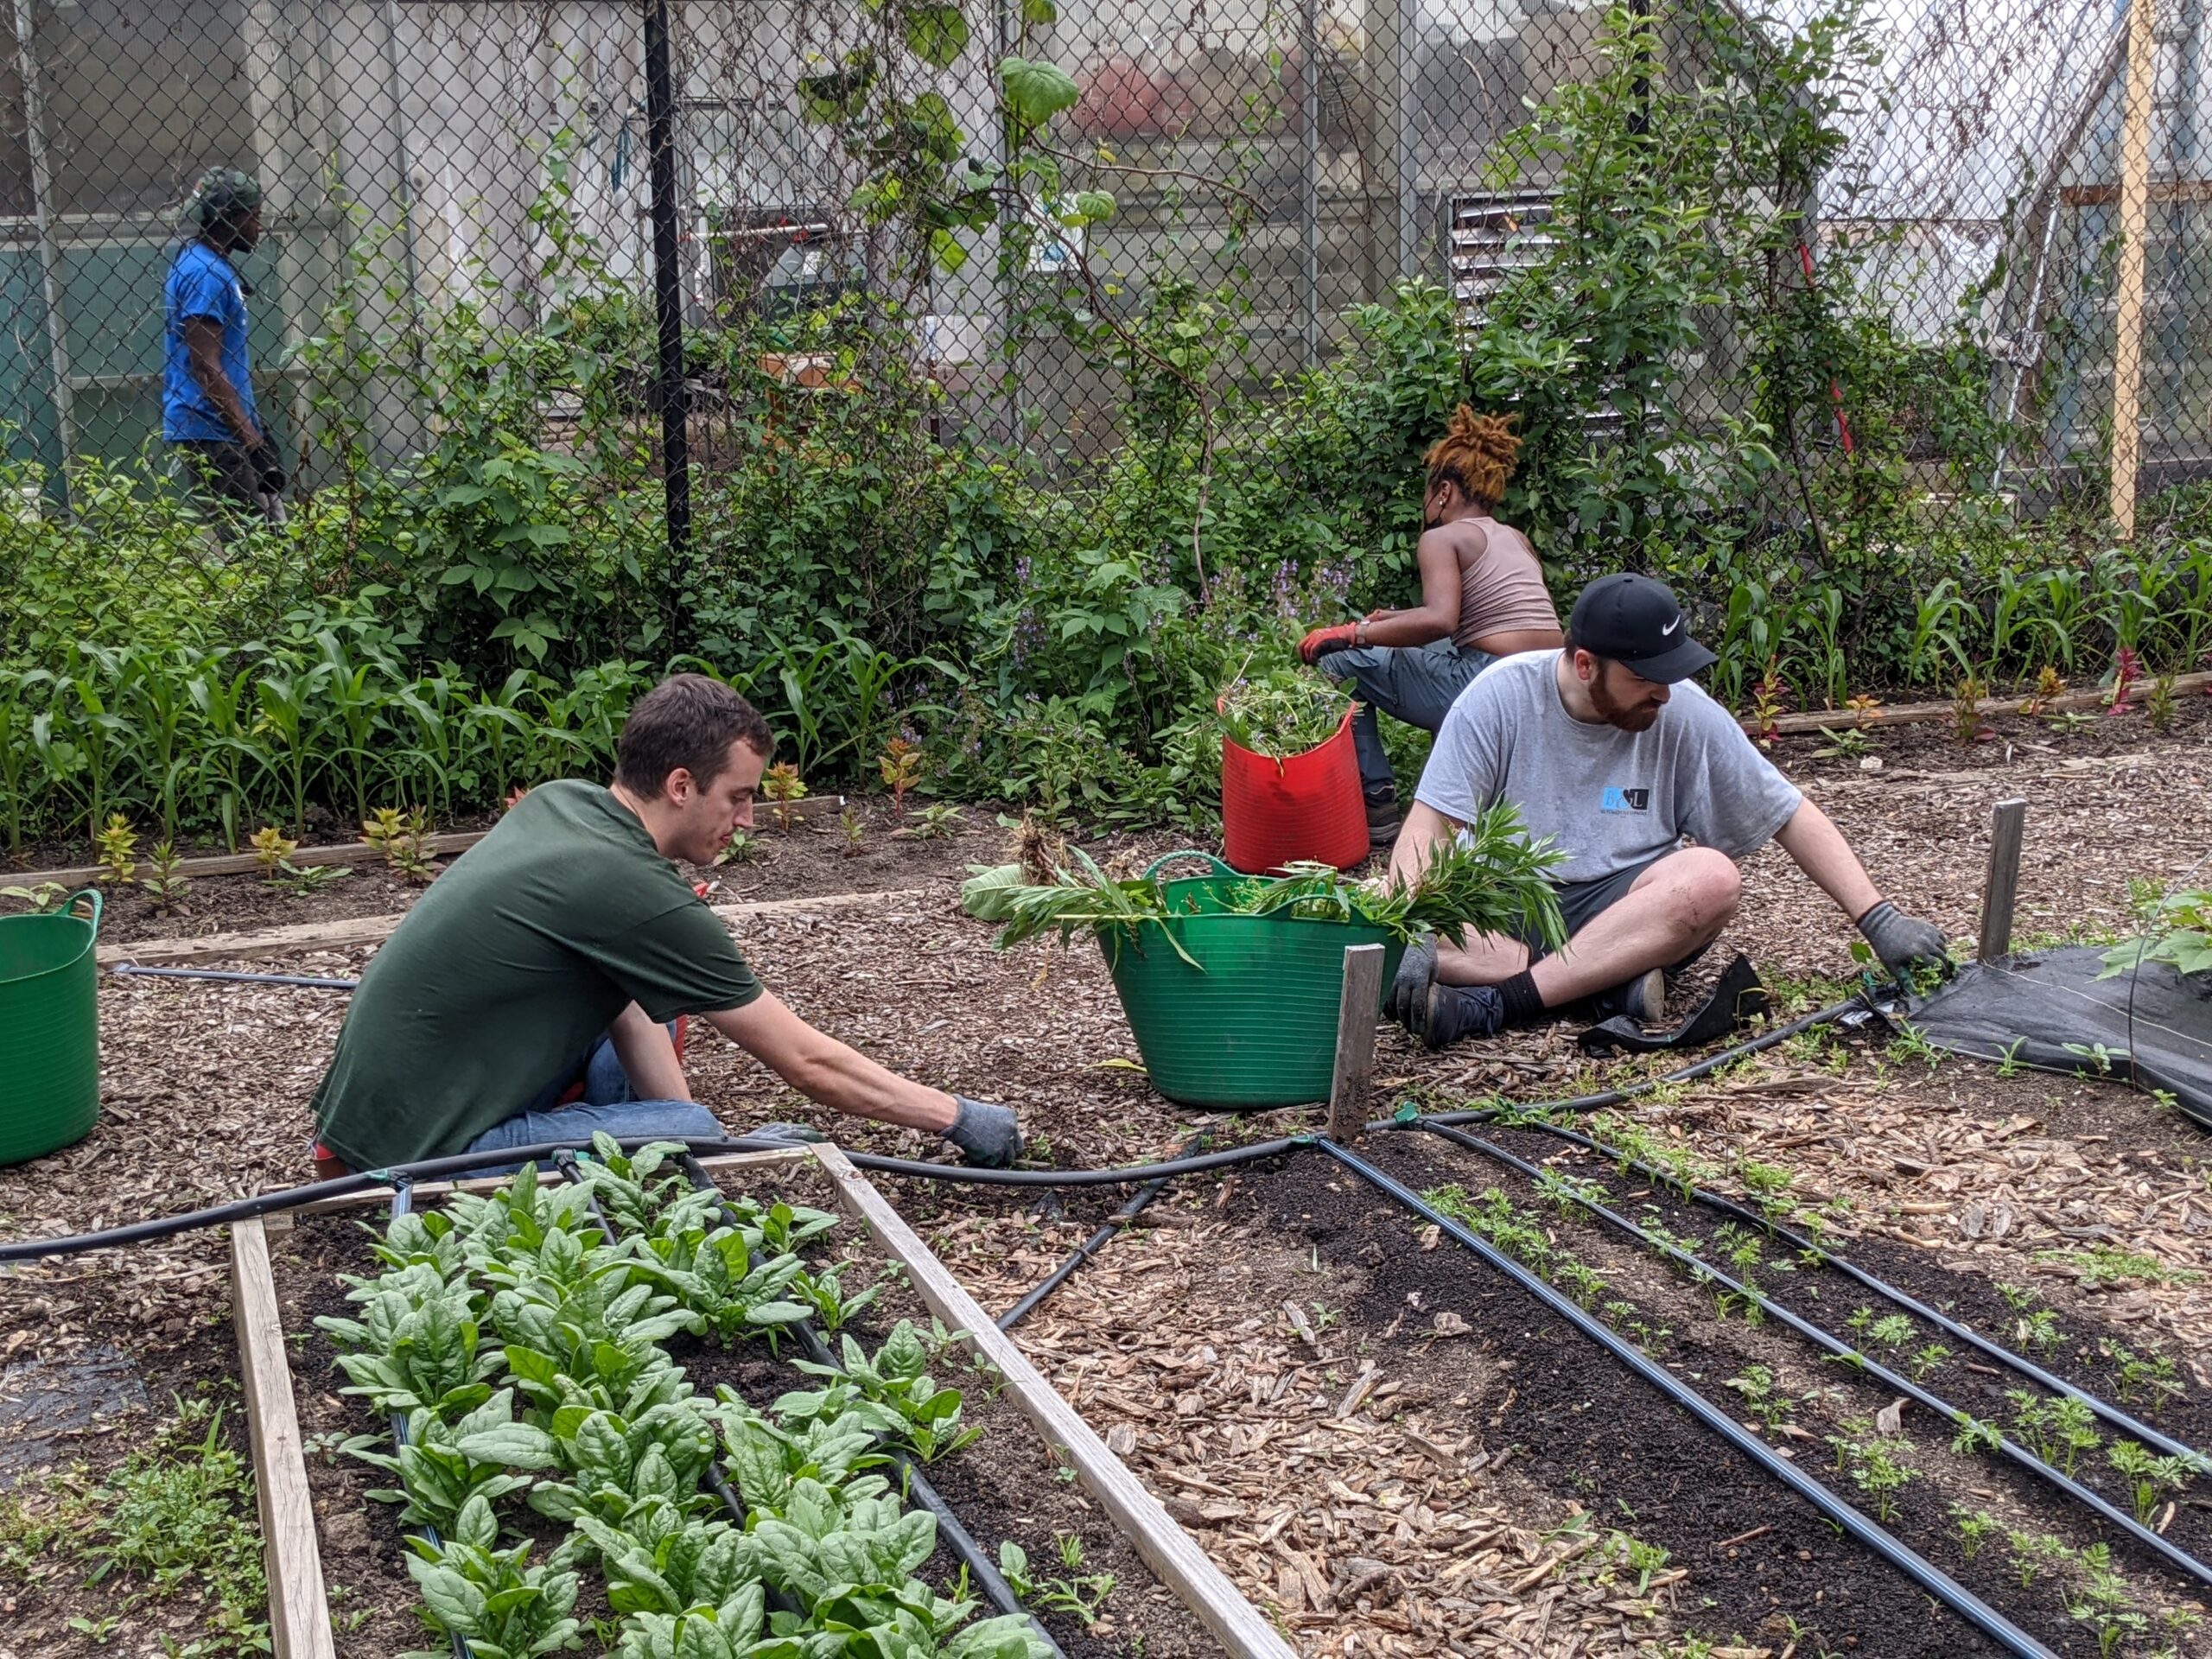 Michael Fergus and Conor Brennan weed rows of vegetables at Chicago Lights Urban Farm alongside other volunteers